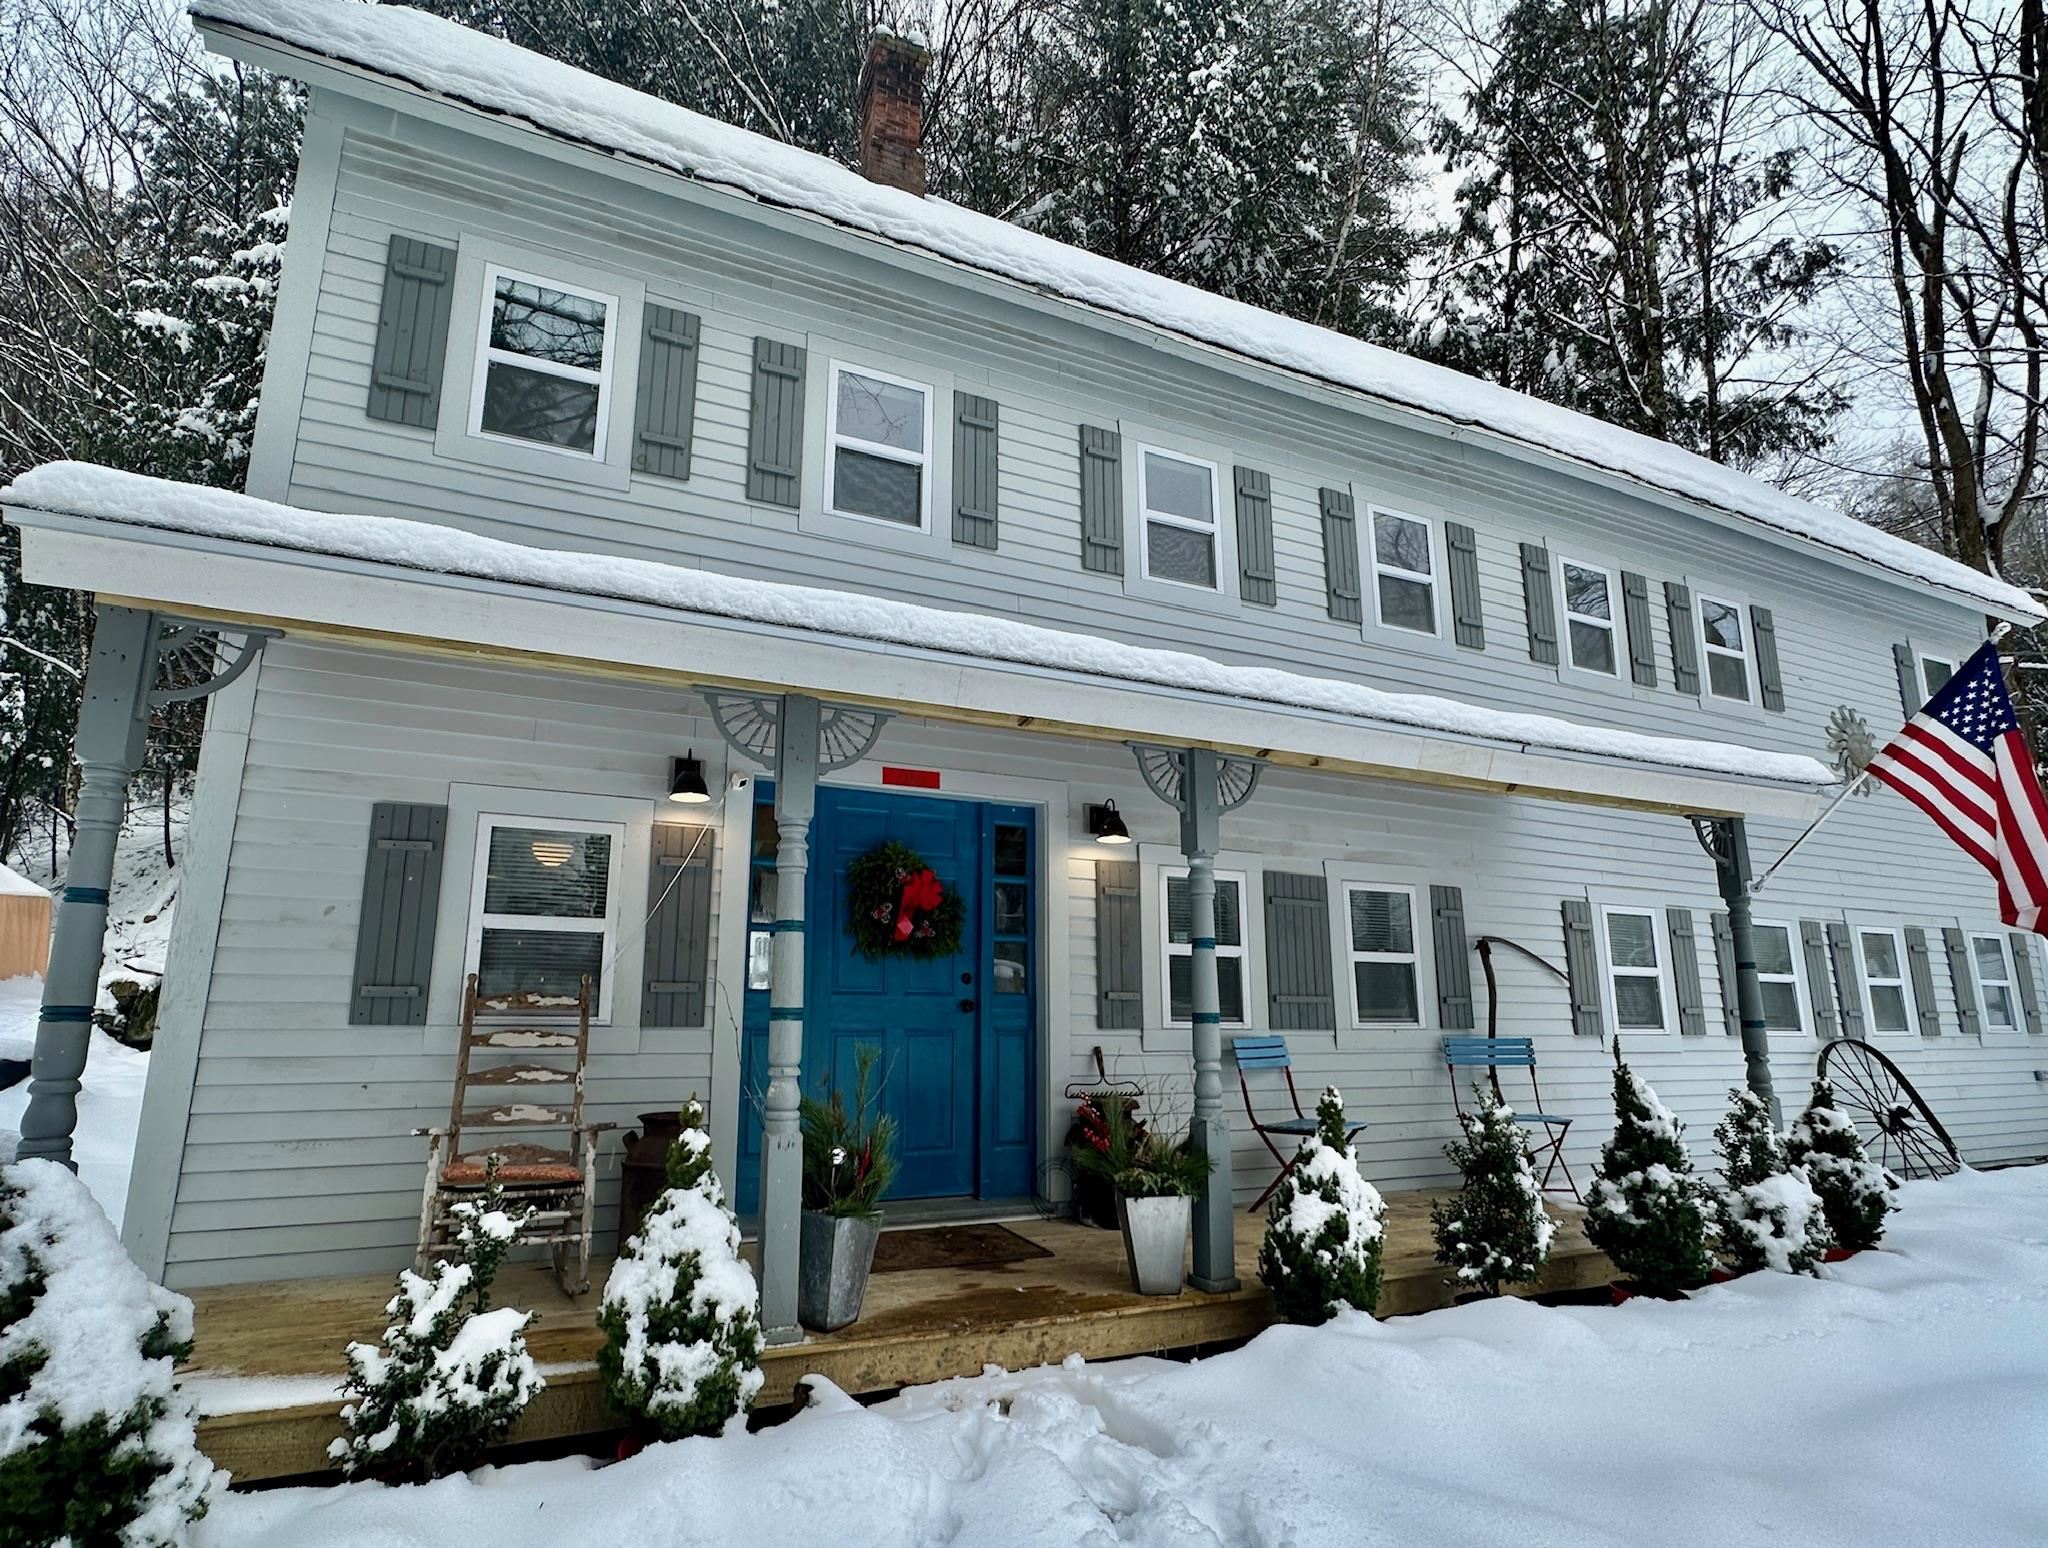 READING VT Homes for sale